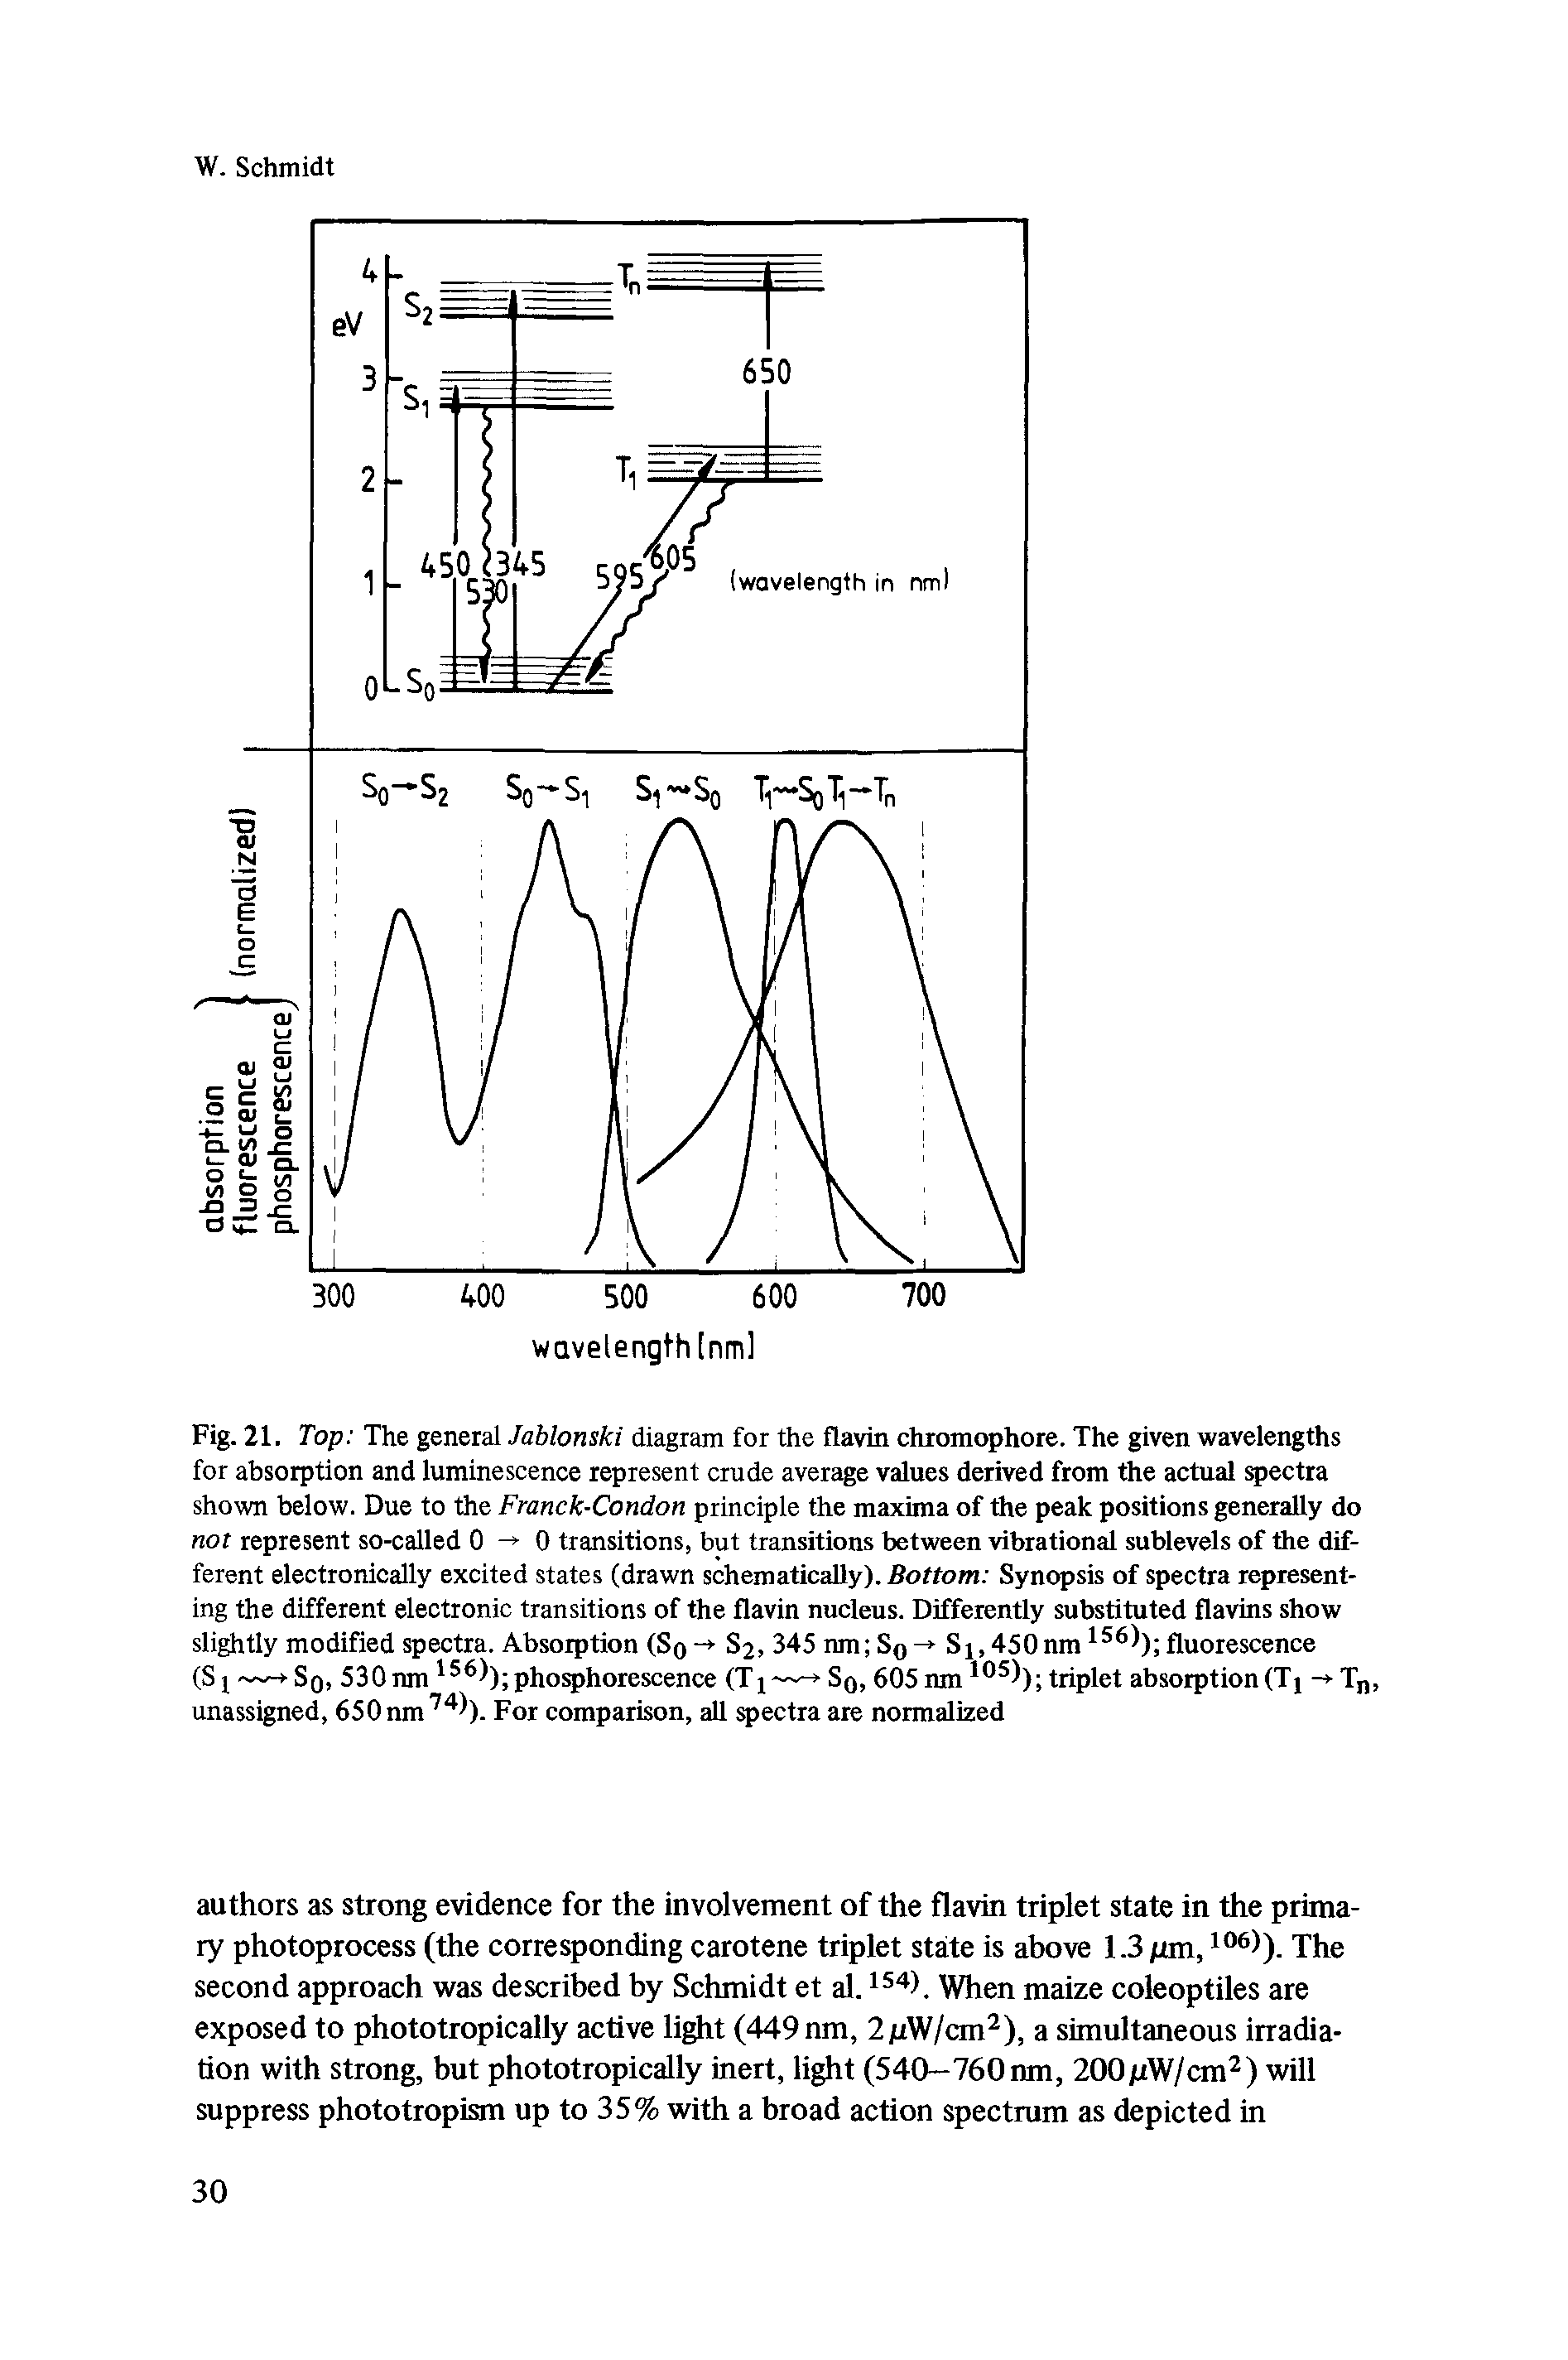 Fig. 21. Top The general Jablonski diagram for the flavin chromophore. The given wavelengths for absorption and luminescence represent crude average values derived from the actual spectra shown below. Due to the Franck-Condon principle the maxima of the peak positions generally do not represent so-called 0 — 0 transitions, but transitions between vibrational sublevels of the different electronically excited states (drawn schematically). Bottom Synopsis of spectra representing the different electronic transitions of the flavin nucleus. Differently substituted flavins show slightly modified spectra. Absorption (So- - S2, 345 nm S0 -> Si,450nm 1561) fluorescence (Sj — S0) 530 nm 156)) phosphorescence (Ty Sq, 605 nm 1051) triplet absorption (Tj ->Tn,...